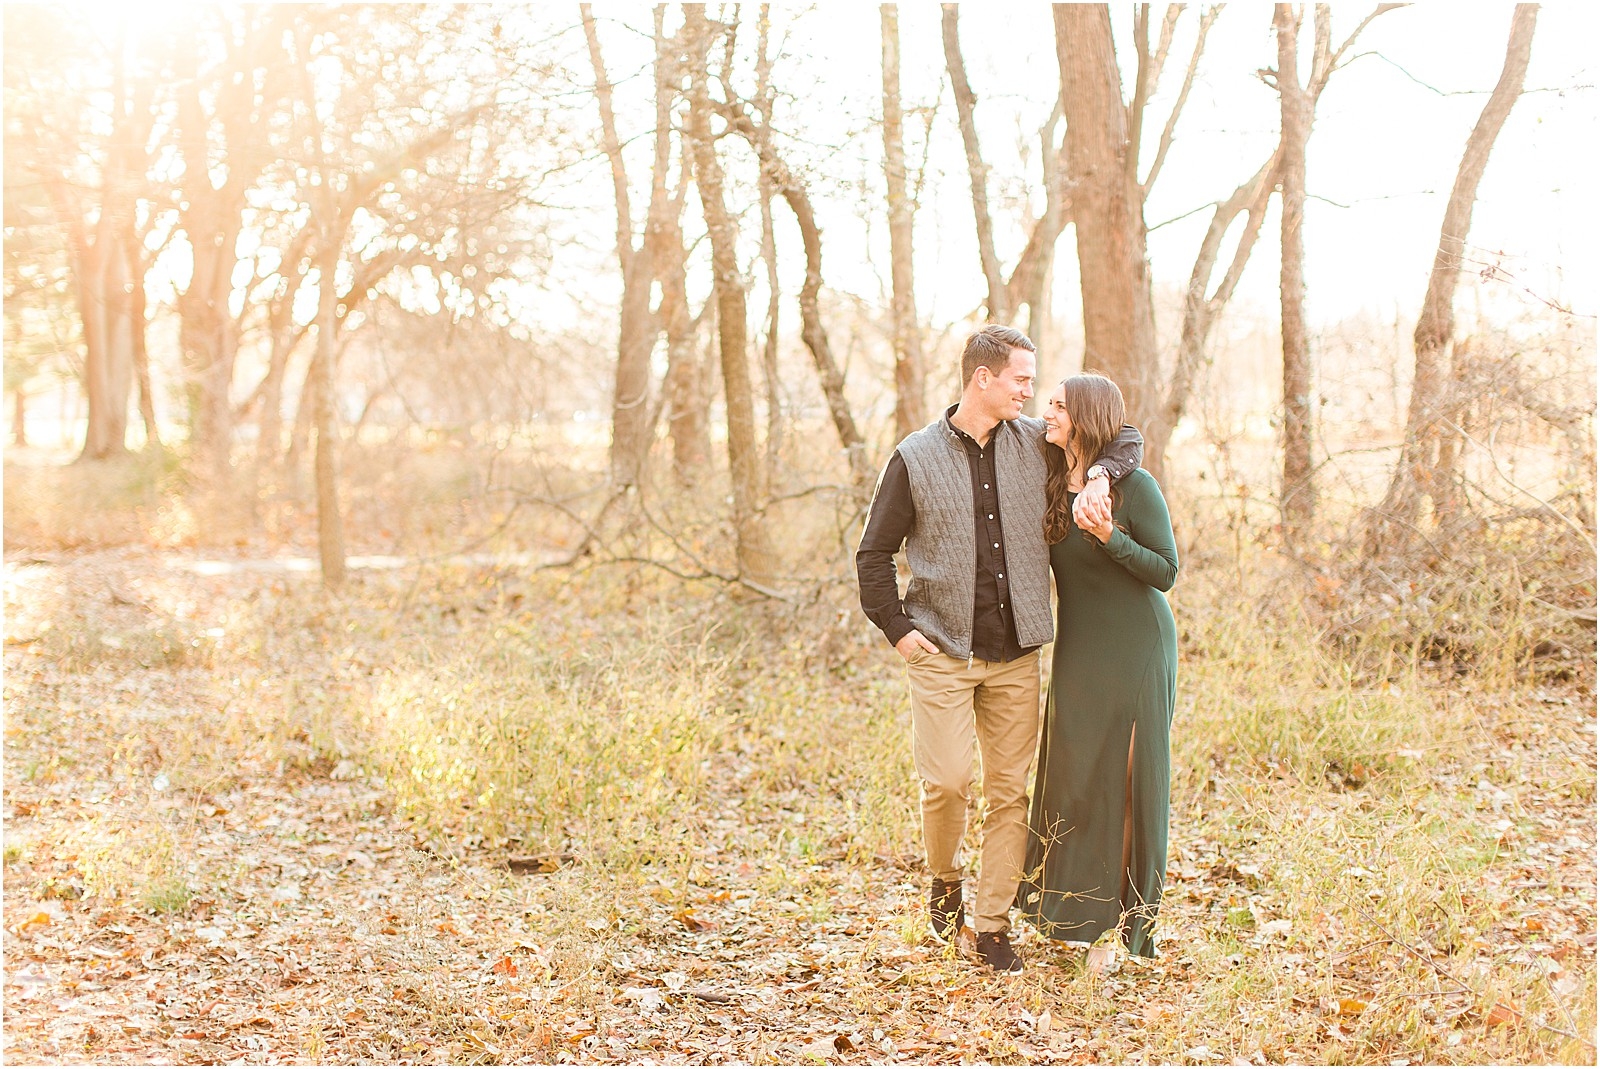 Kaley and Devon's fall Evansville Indiana engagement session. | #fallengagementsession #evansvilleindiana #evansvilleindianawedding | 0022.jpg